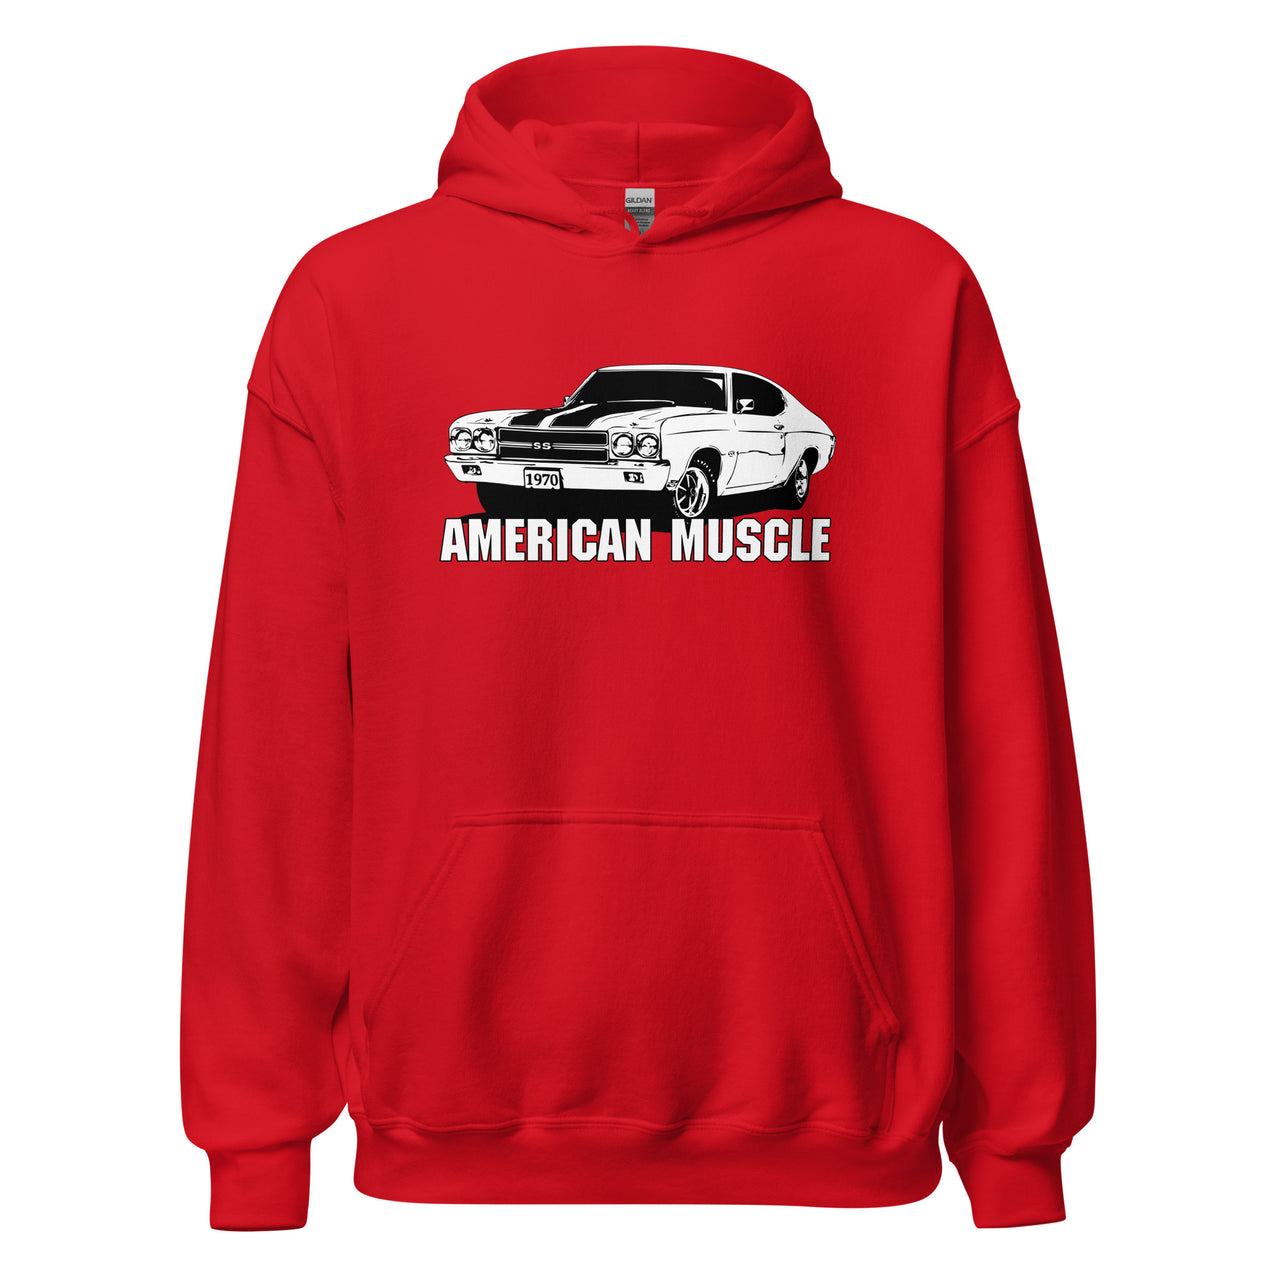 1970 Chevelle Hoodie in red